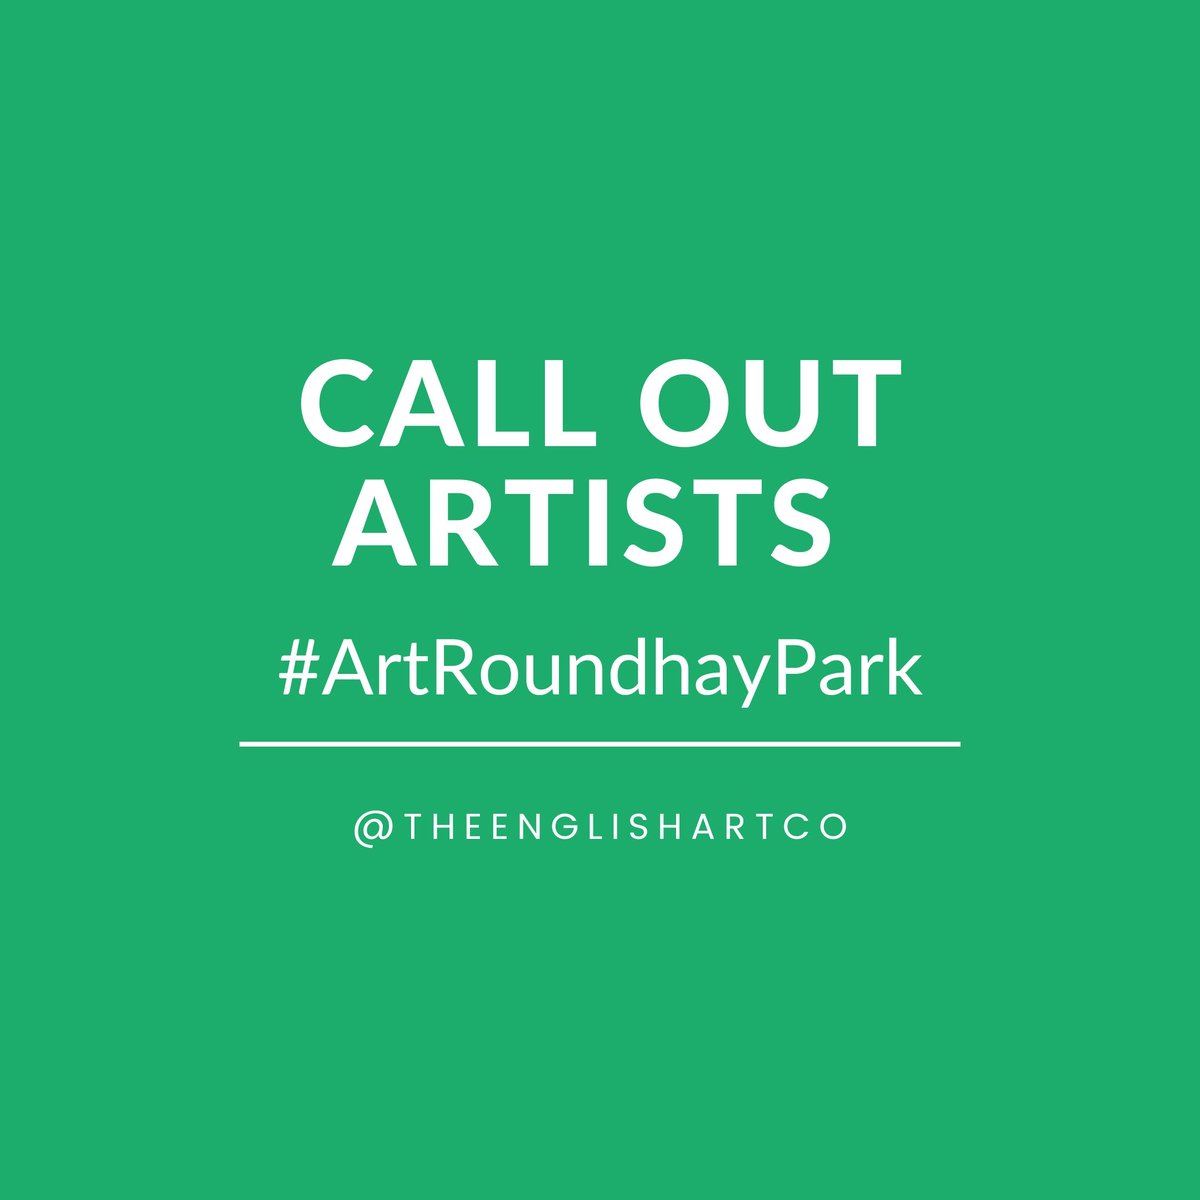 CALL OUT ARTISTS // SOON ! 

Keep an eye out for our latest call out - we’ll be opening out for submissions soon.

Deadline: 5.7.23

buff.ly/3qBR228

#artistcallout #ArtRoundhayPark #RoundhayPark #Leeds #newexhibition #visitleeds #ceramics #art #abstract #mixedmedia